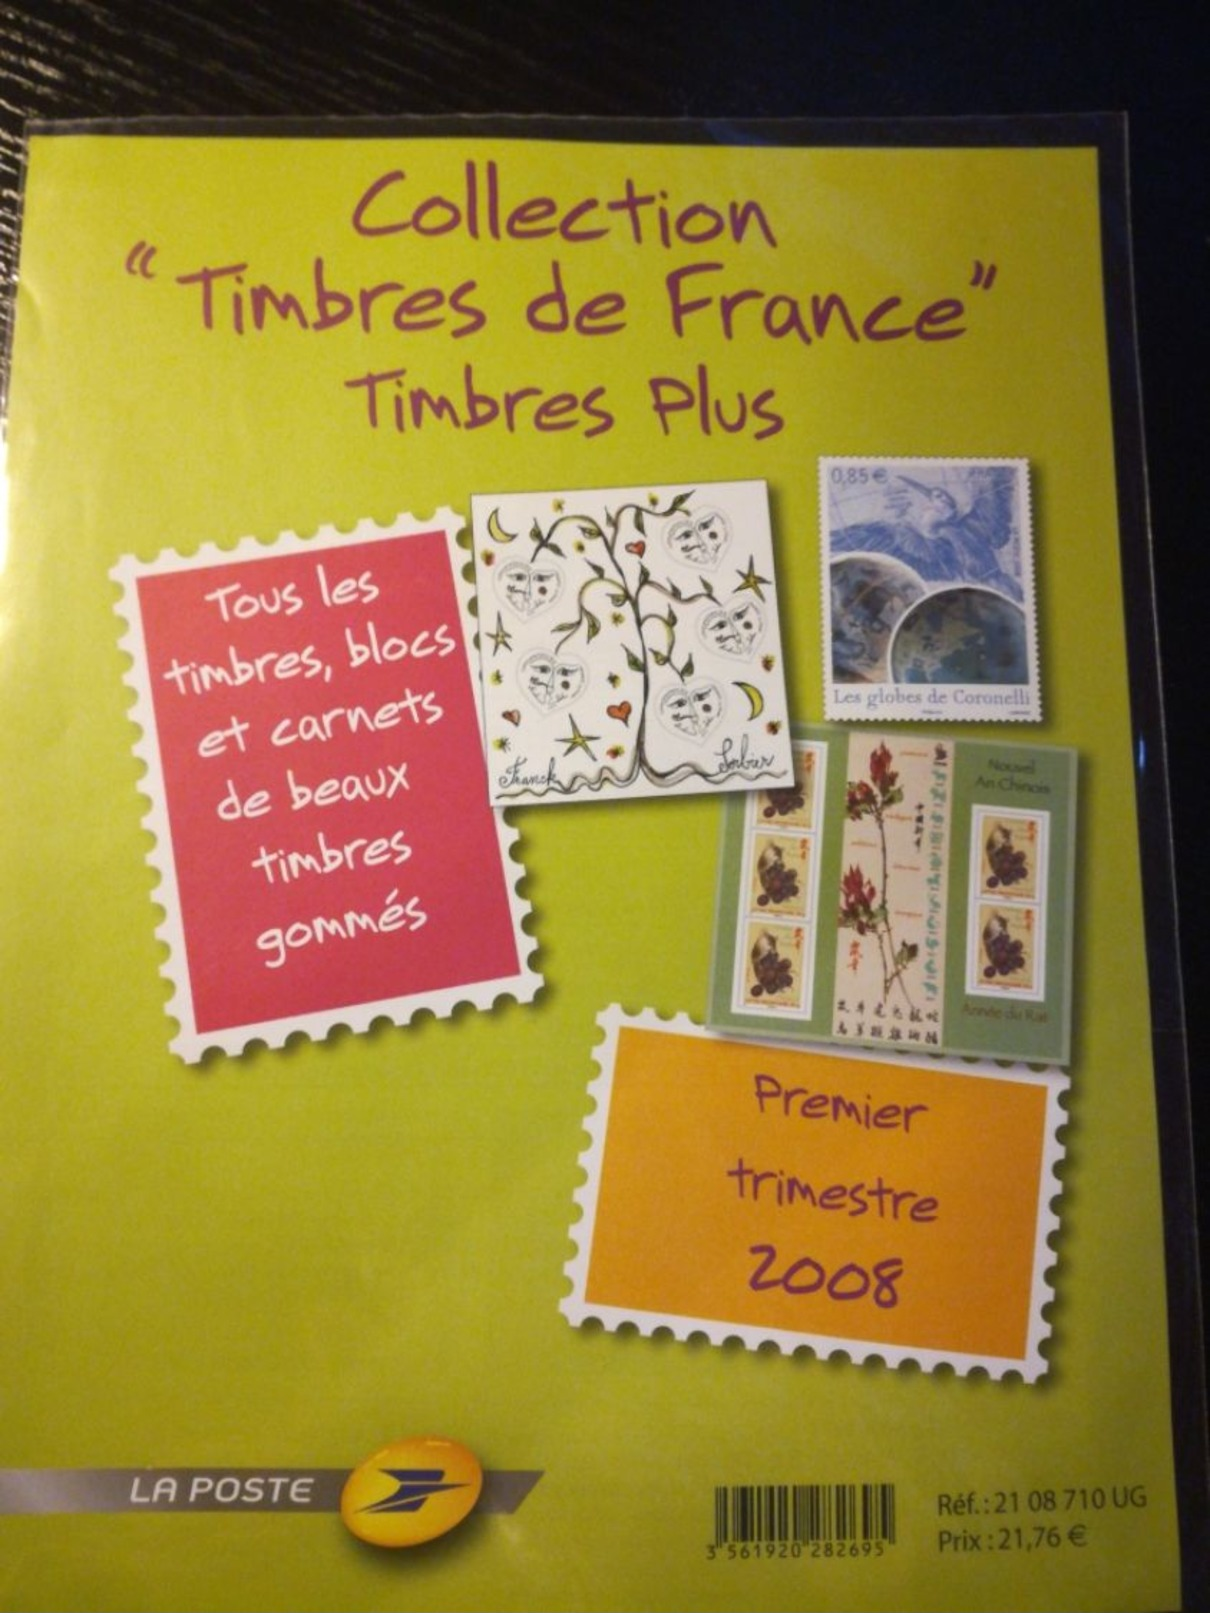 1e Trim 2008 Collection "Timbres De France" Timbres Plus Neufs | Chinois | Coronelli | Sorbier | Droopy - Nuovi